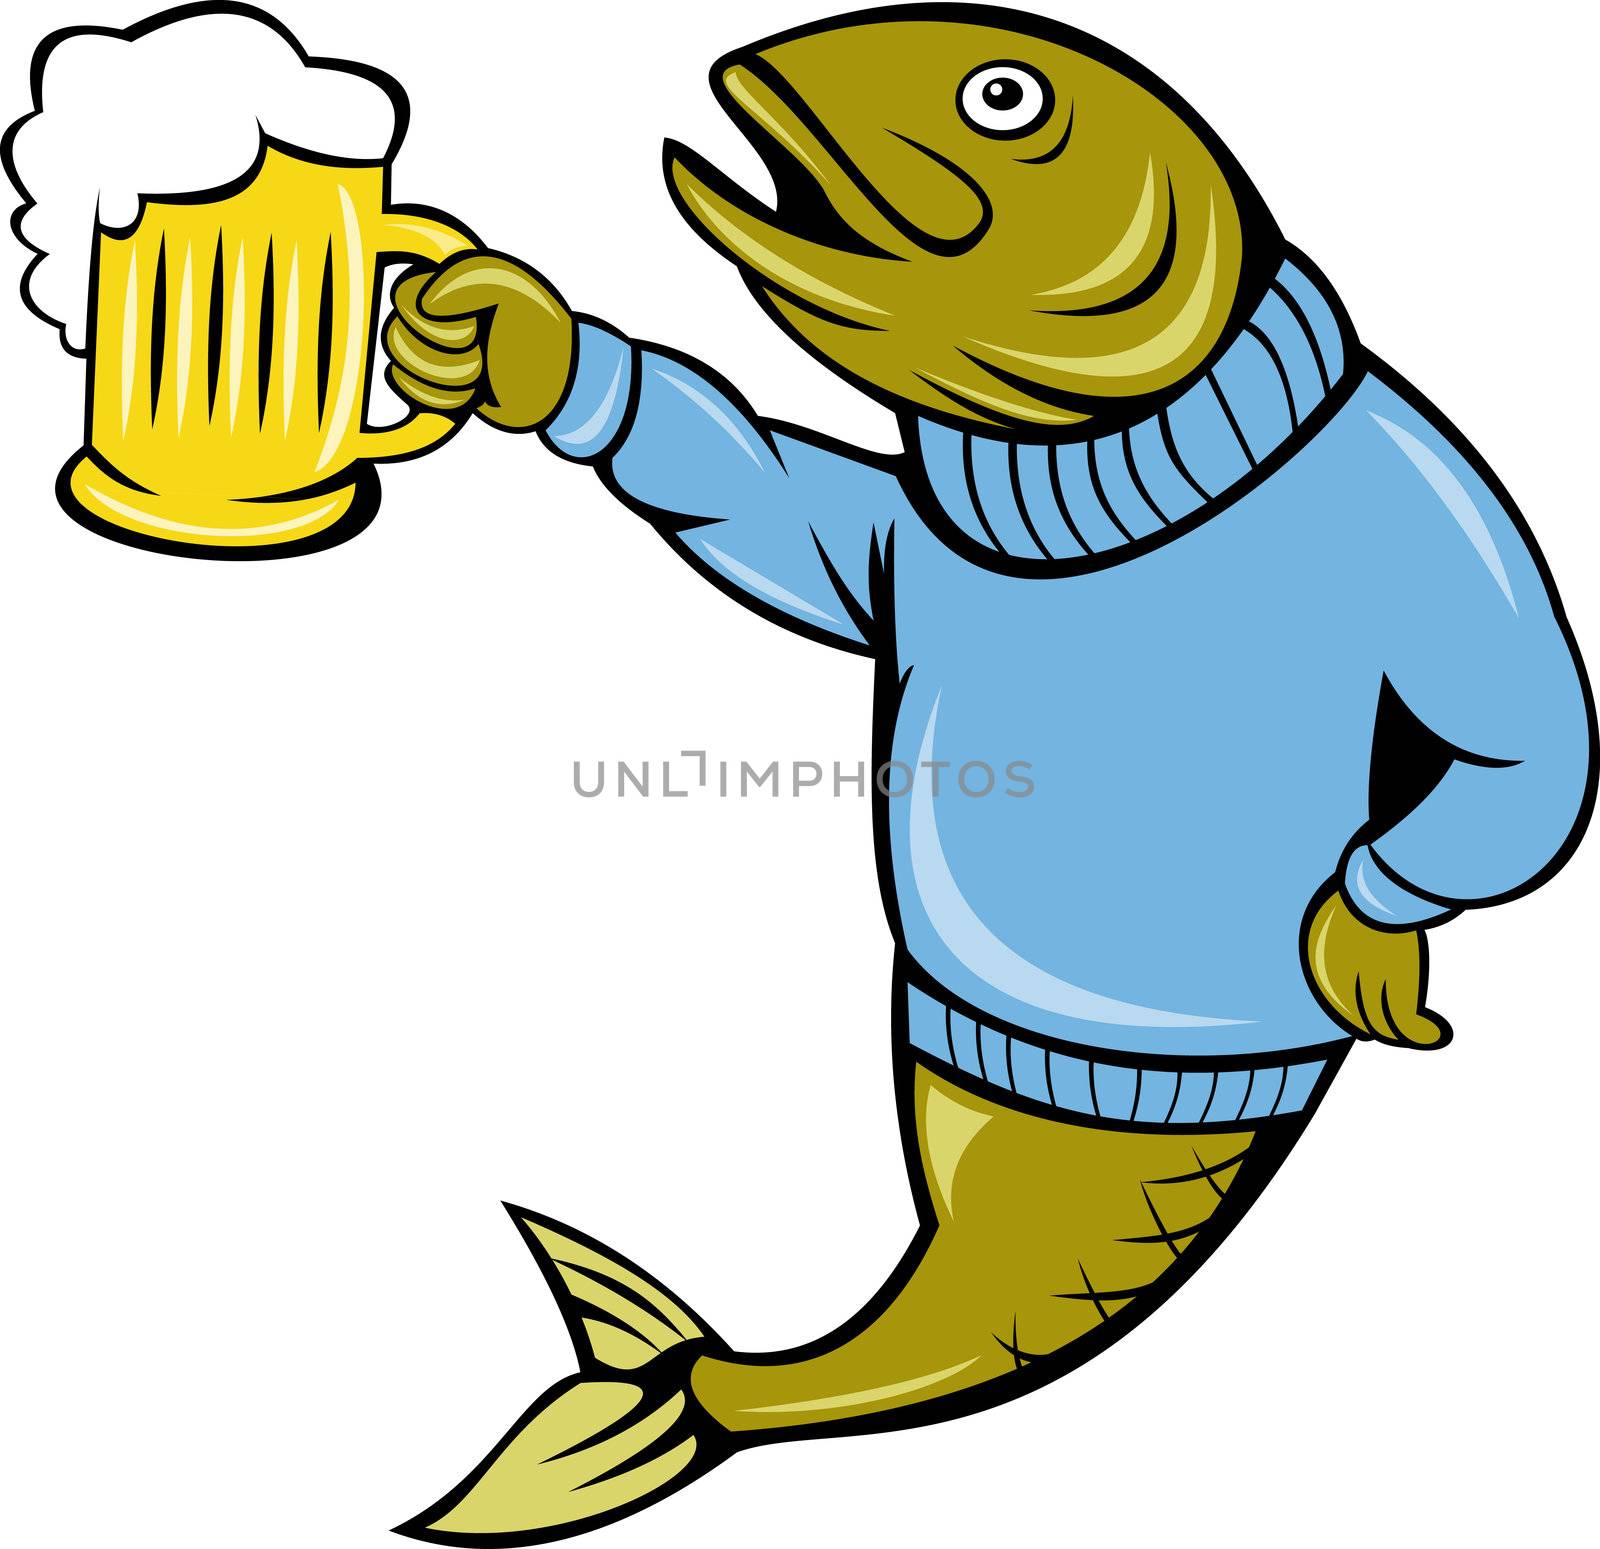 Trout fish holding a beer mug by patrimonio